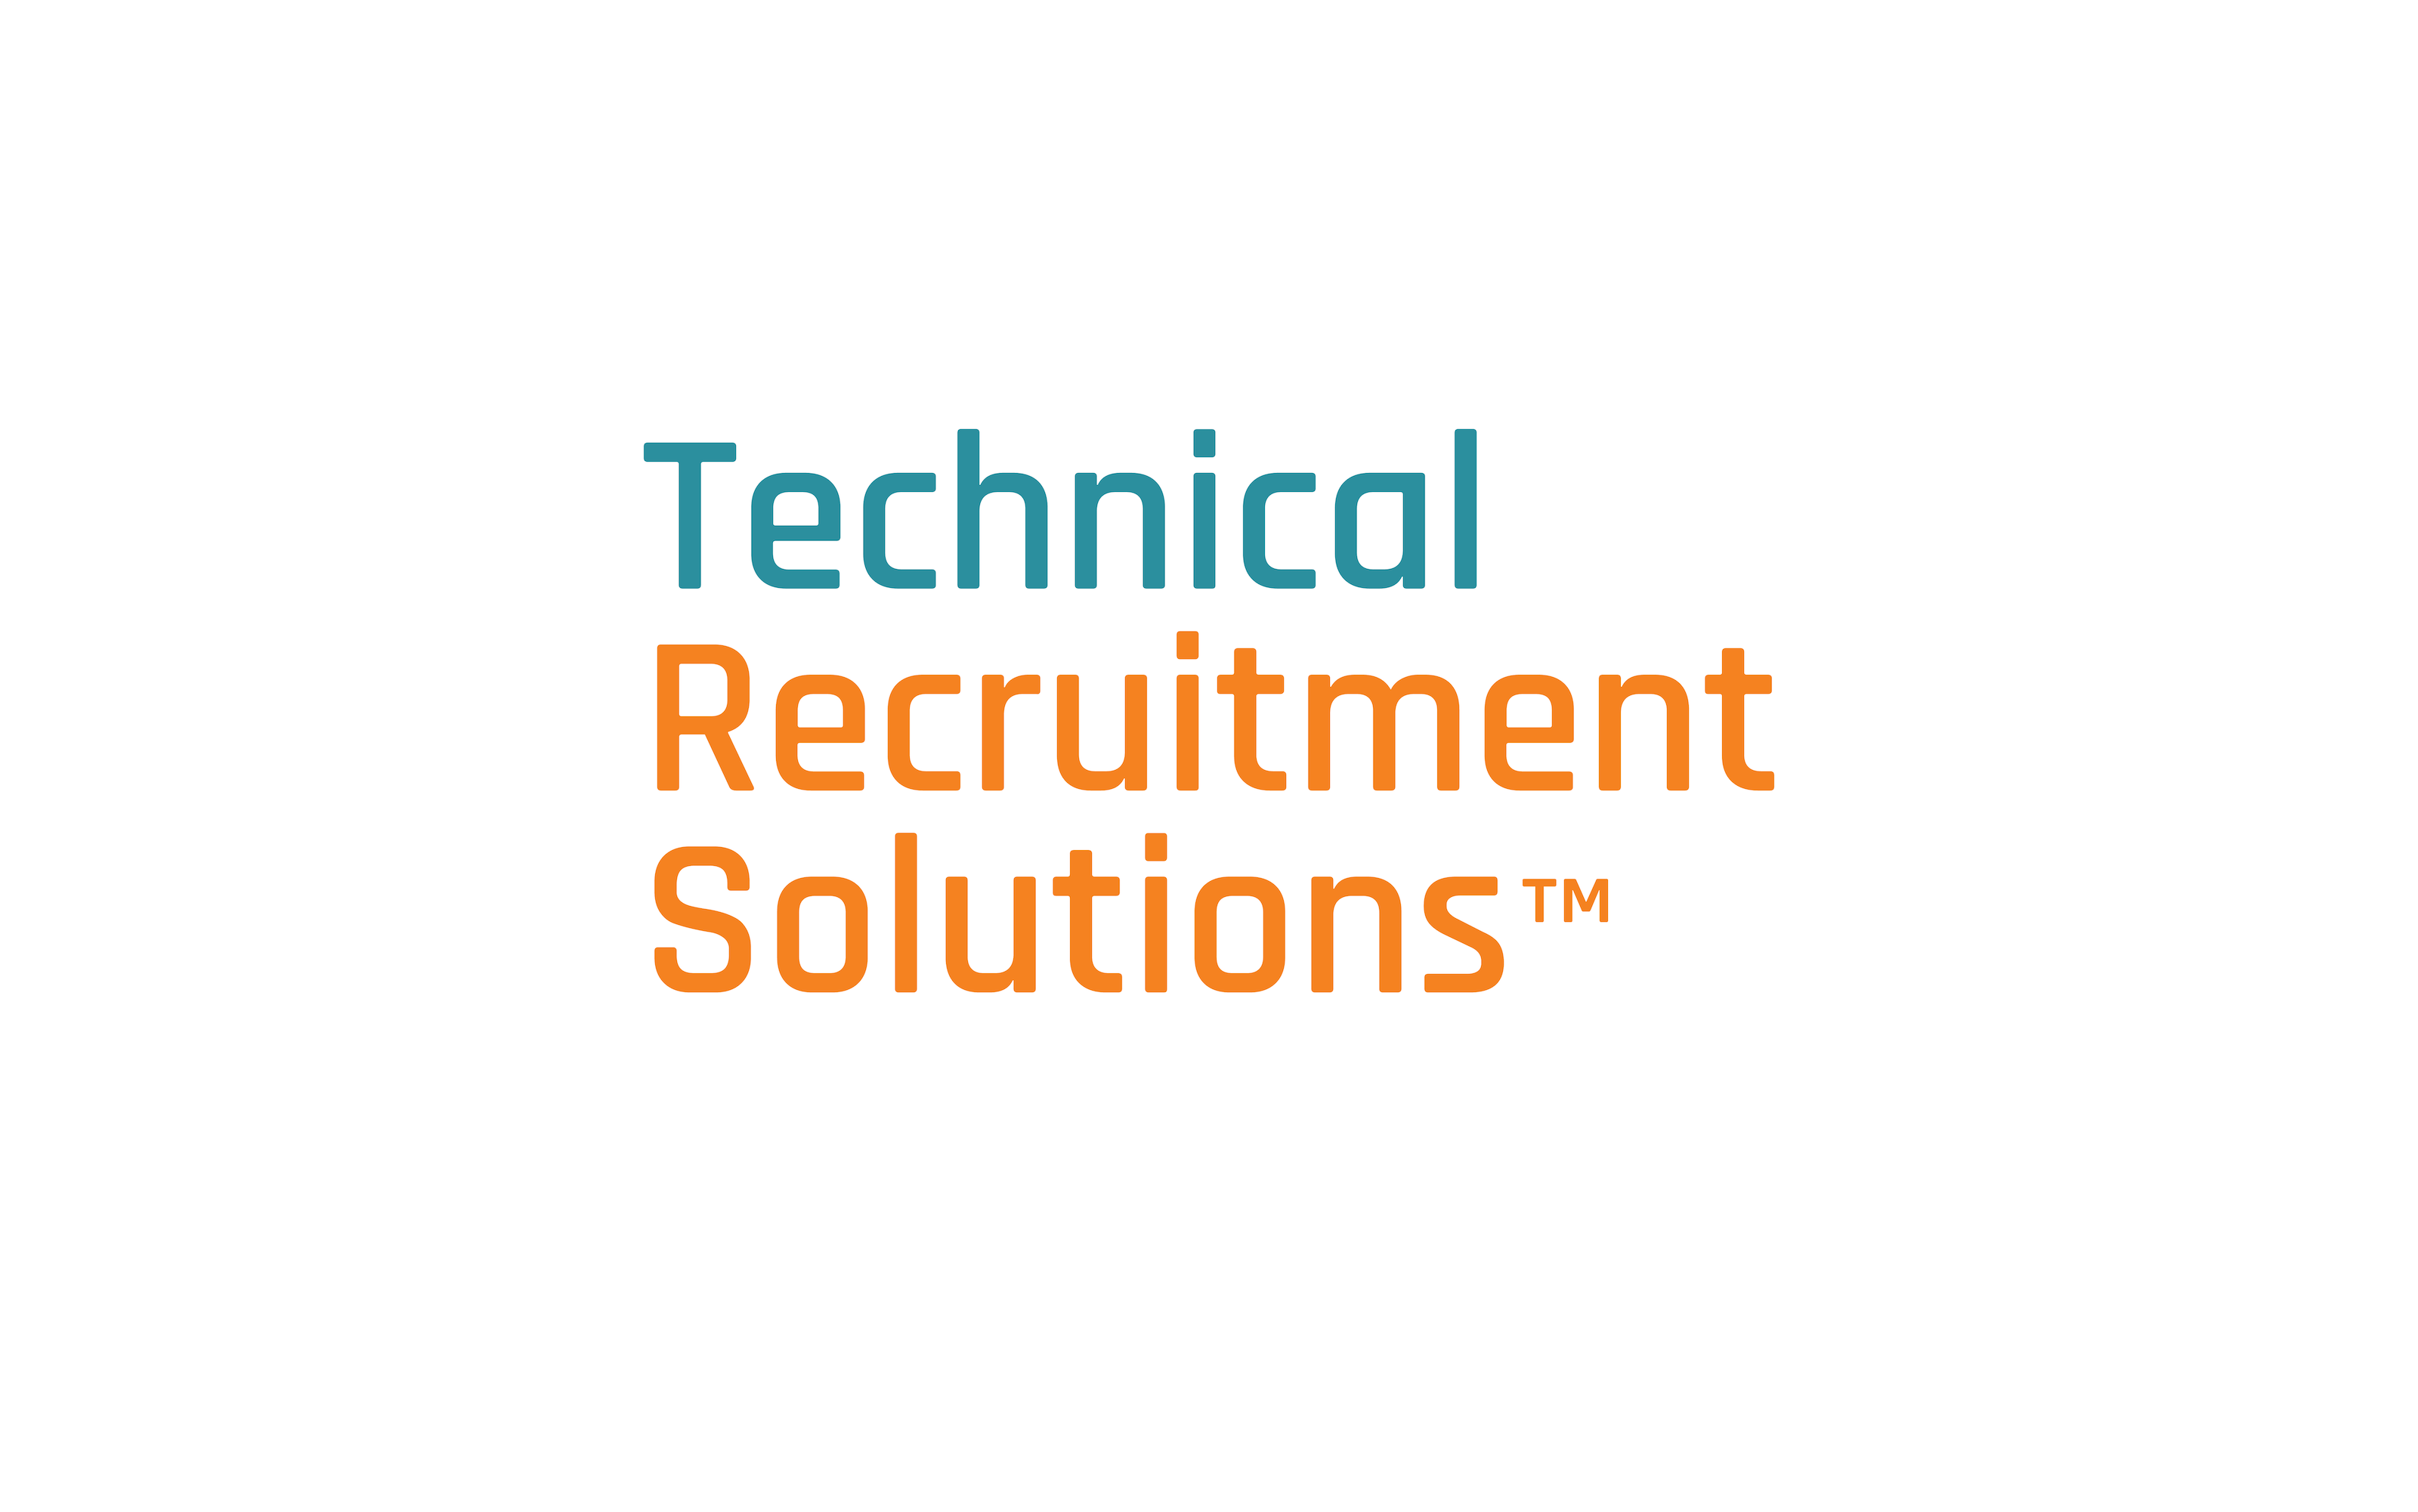 Technical Recruitment Solutions logo designed by re:brand